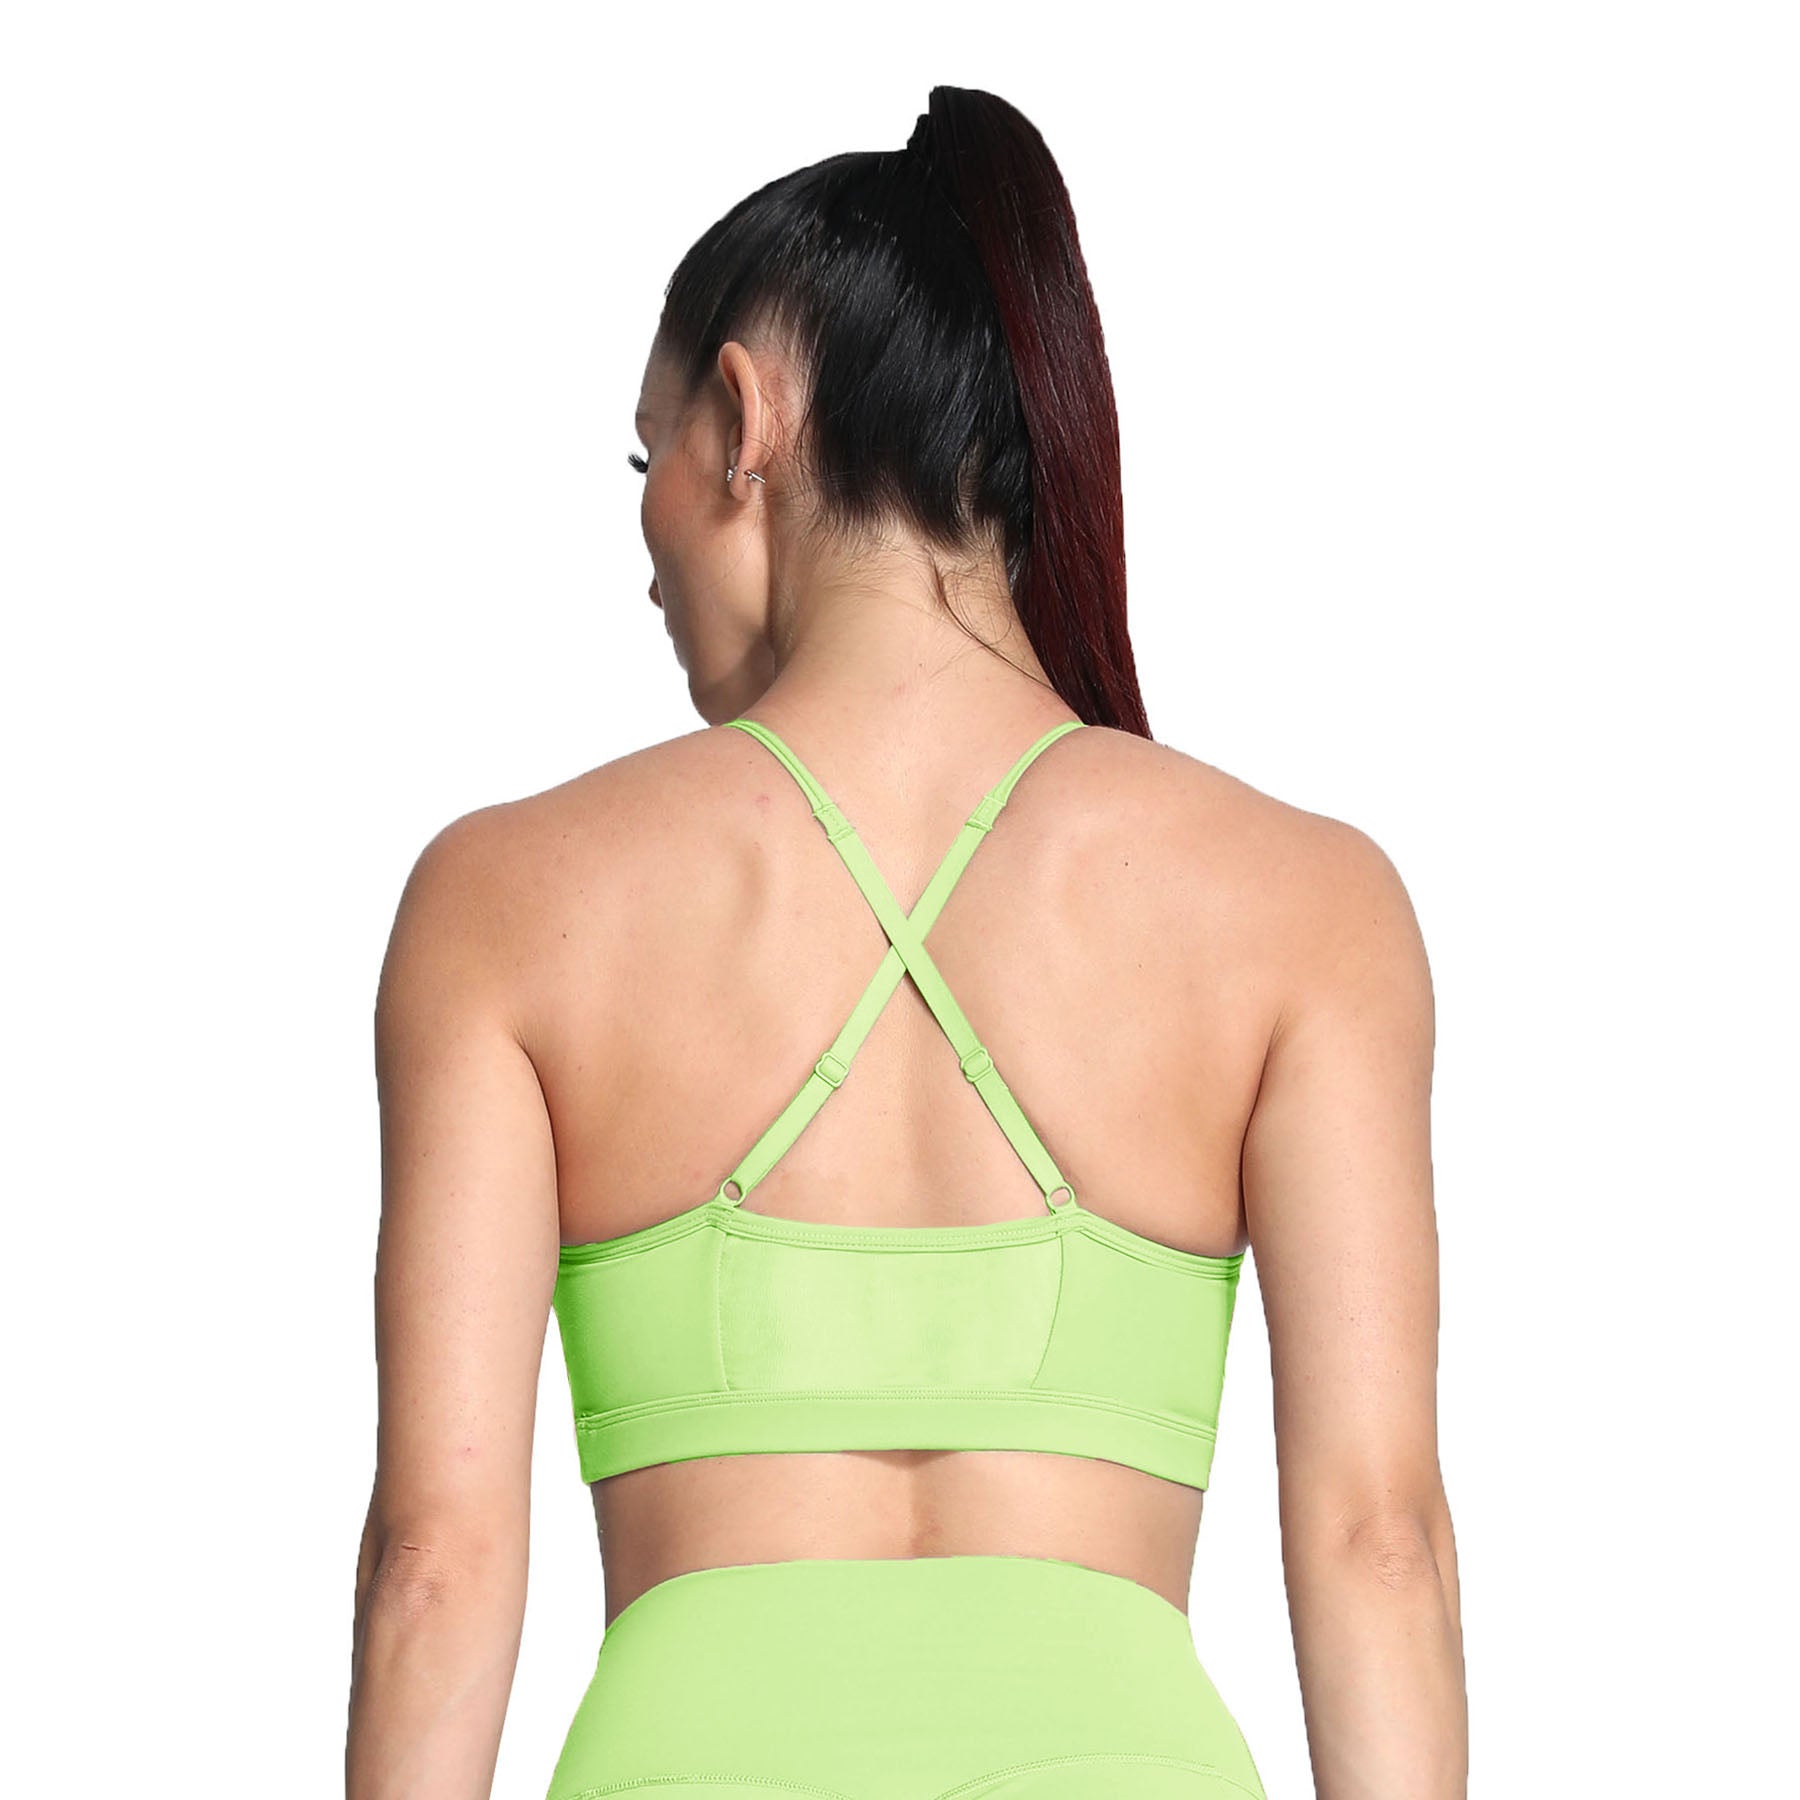 Another amazing Aoxjox bra! #aoxjox #find #activewear